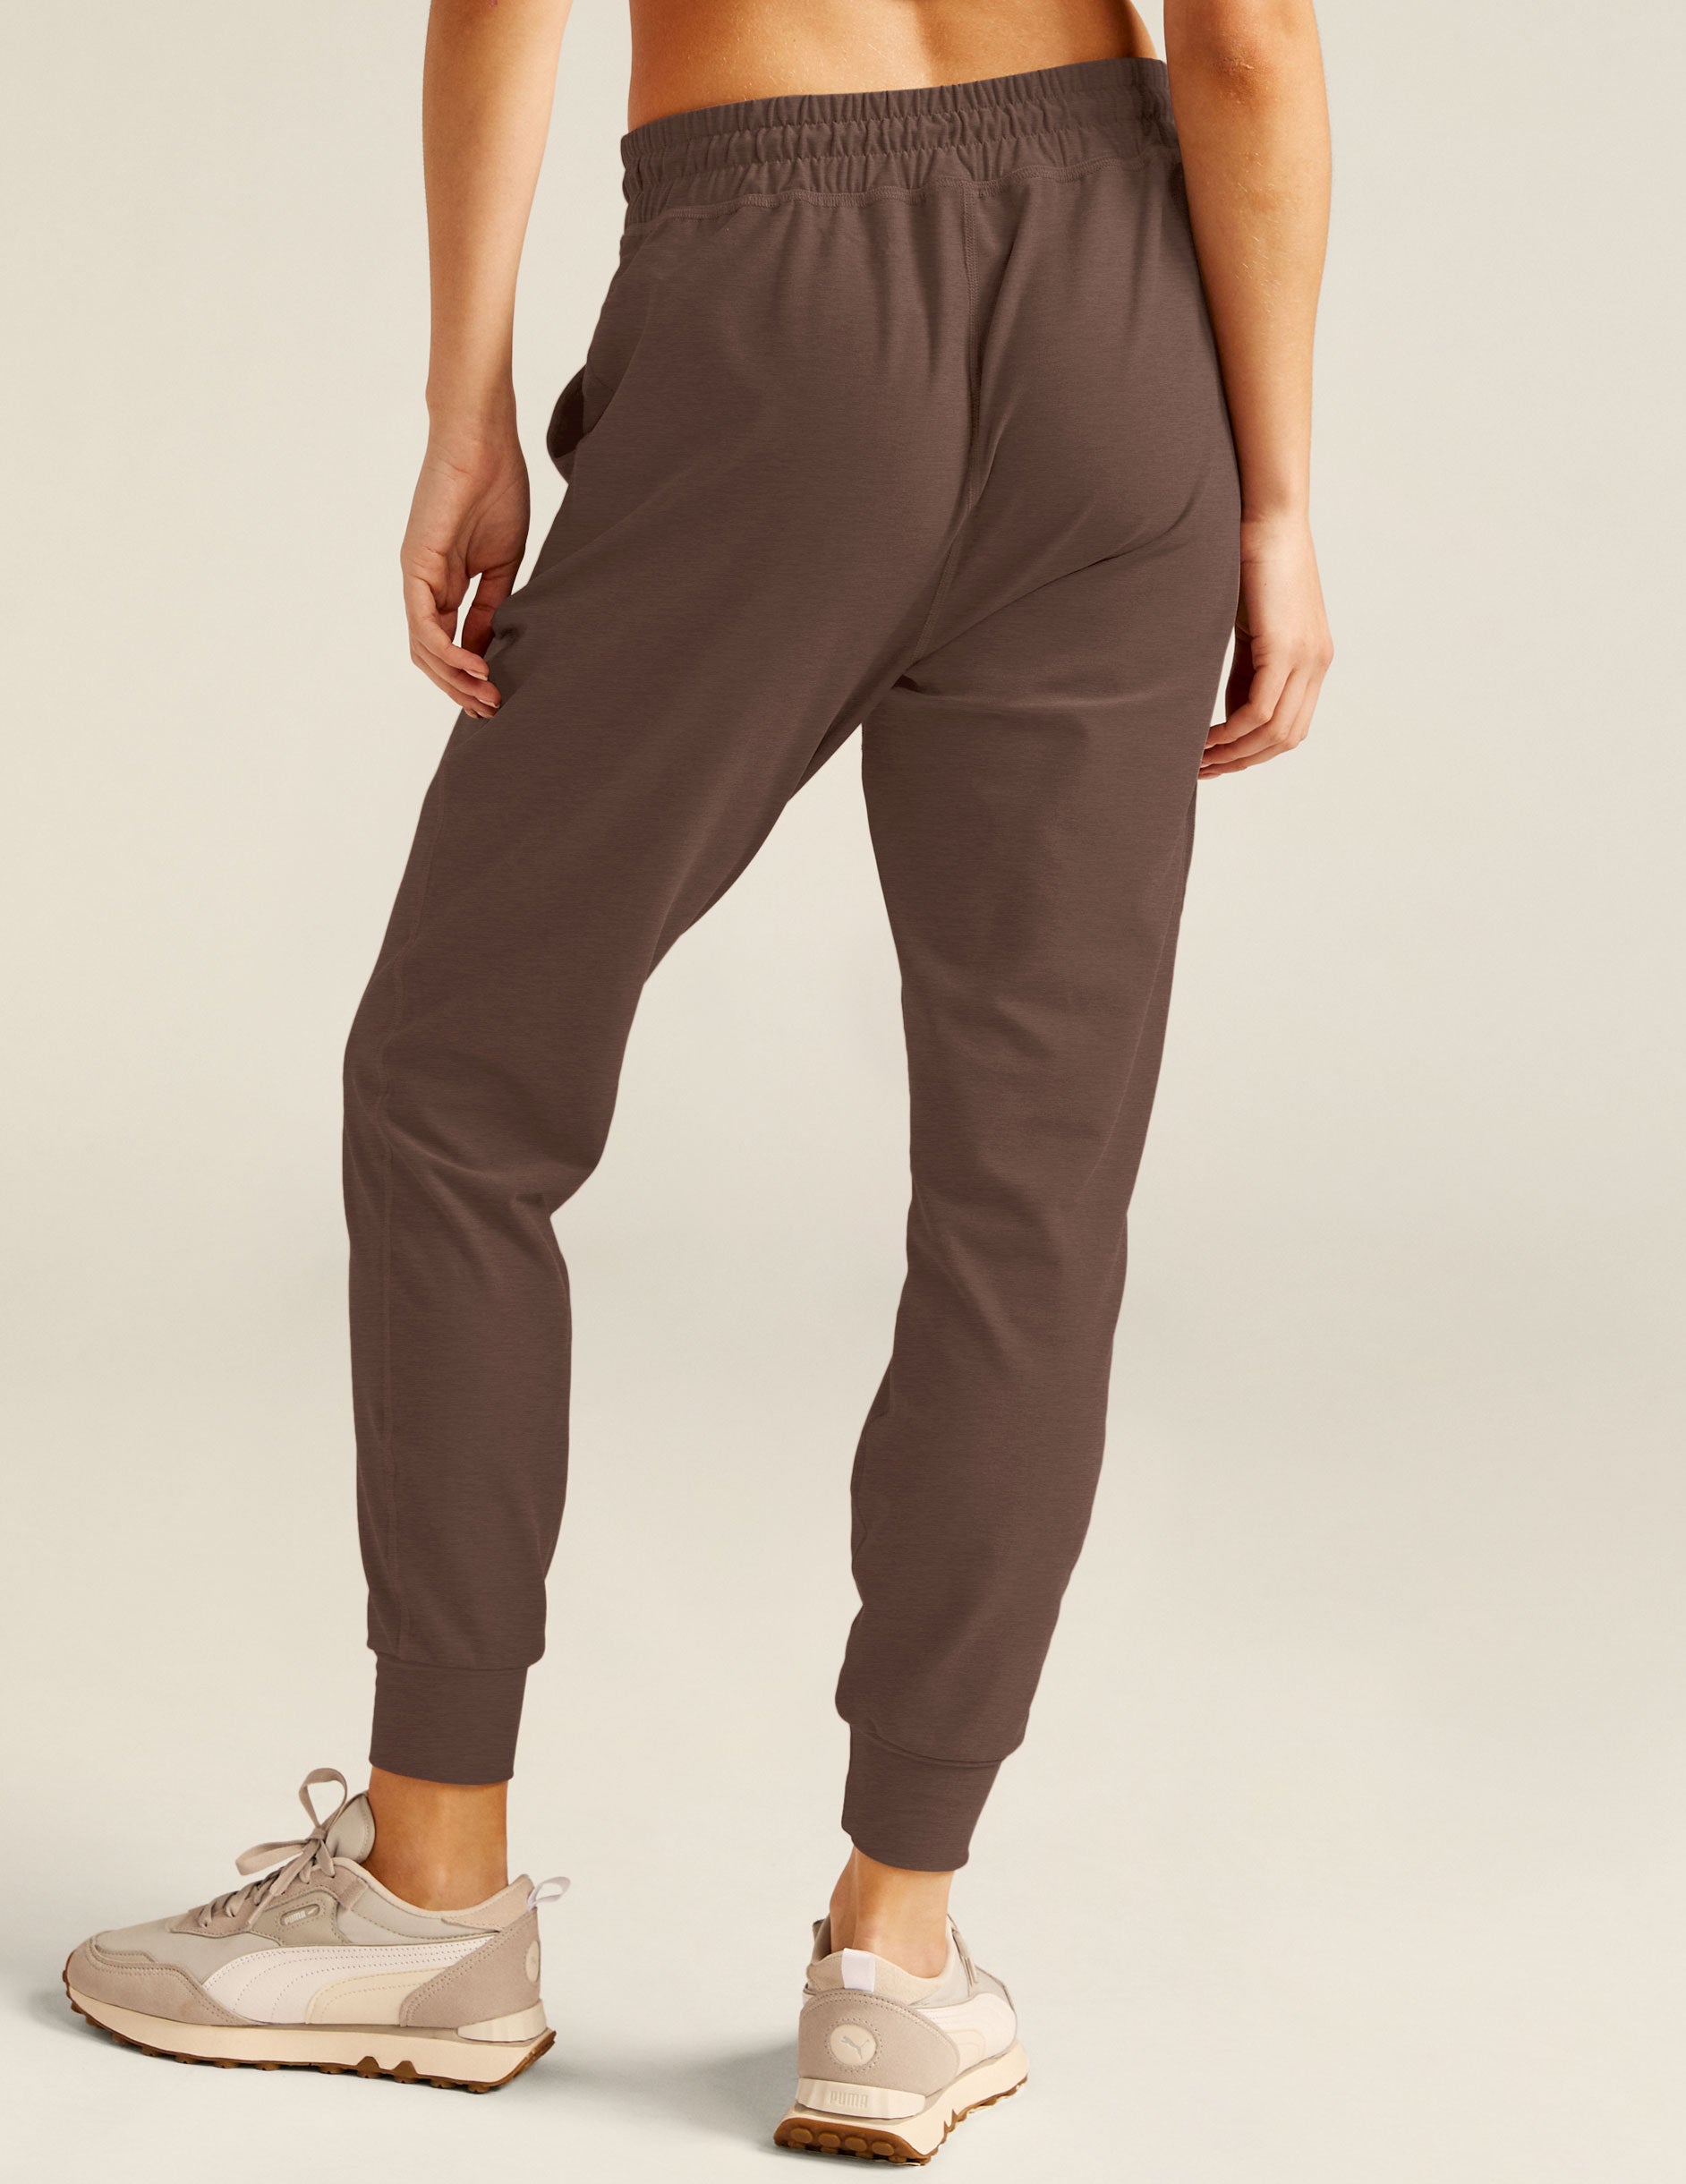 brown midi pocket joggers with an elastic waistband and drawstring. 